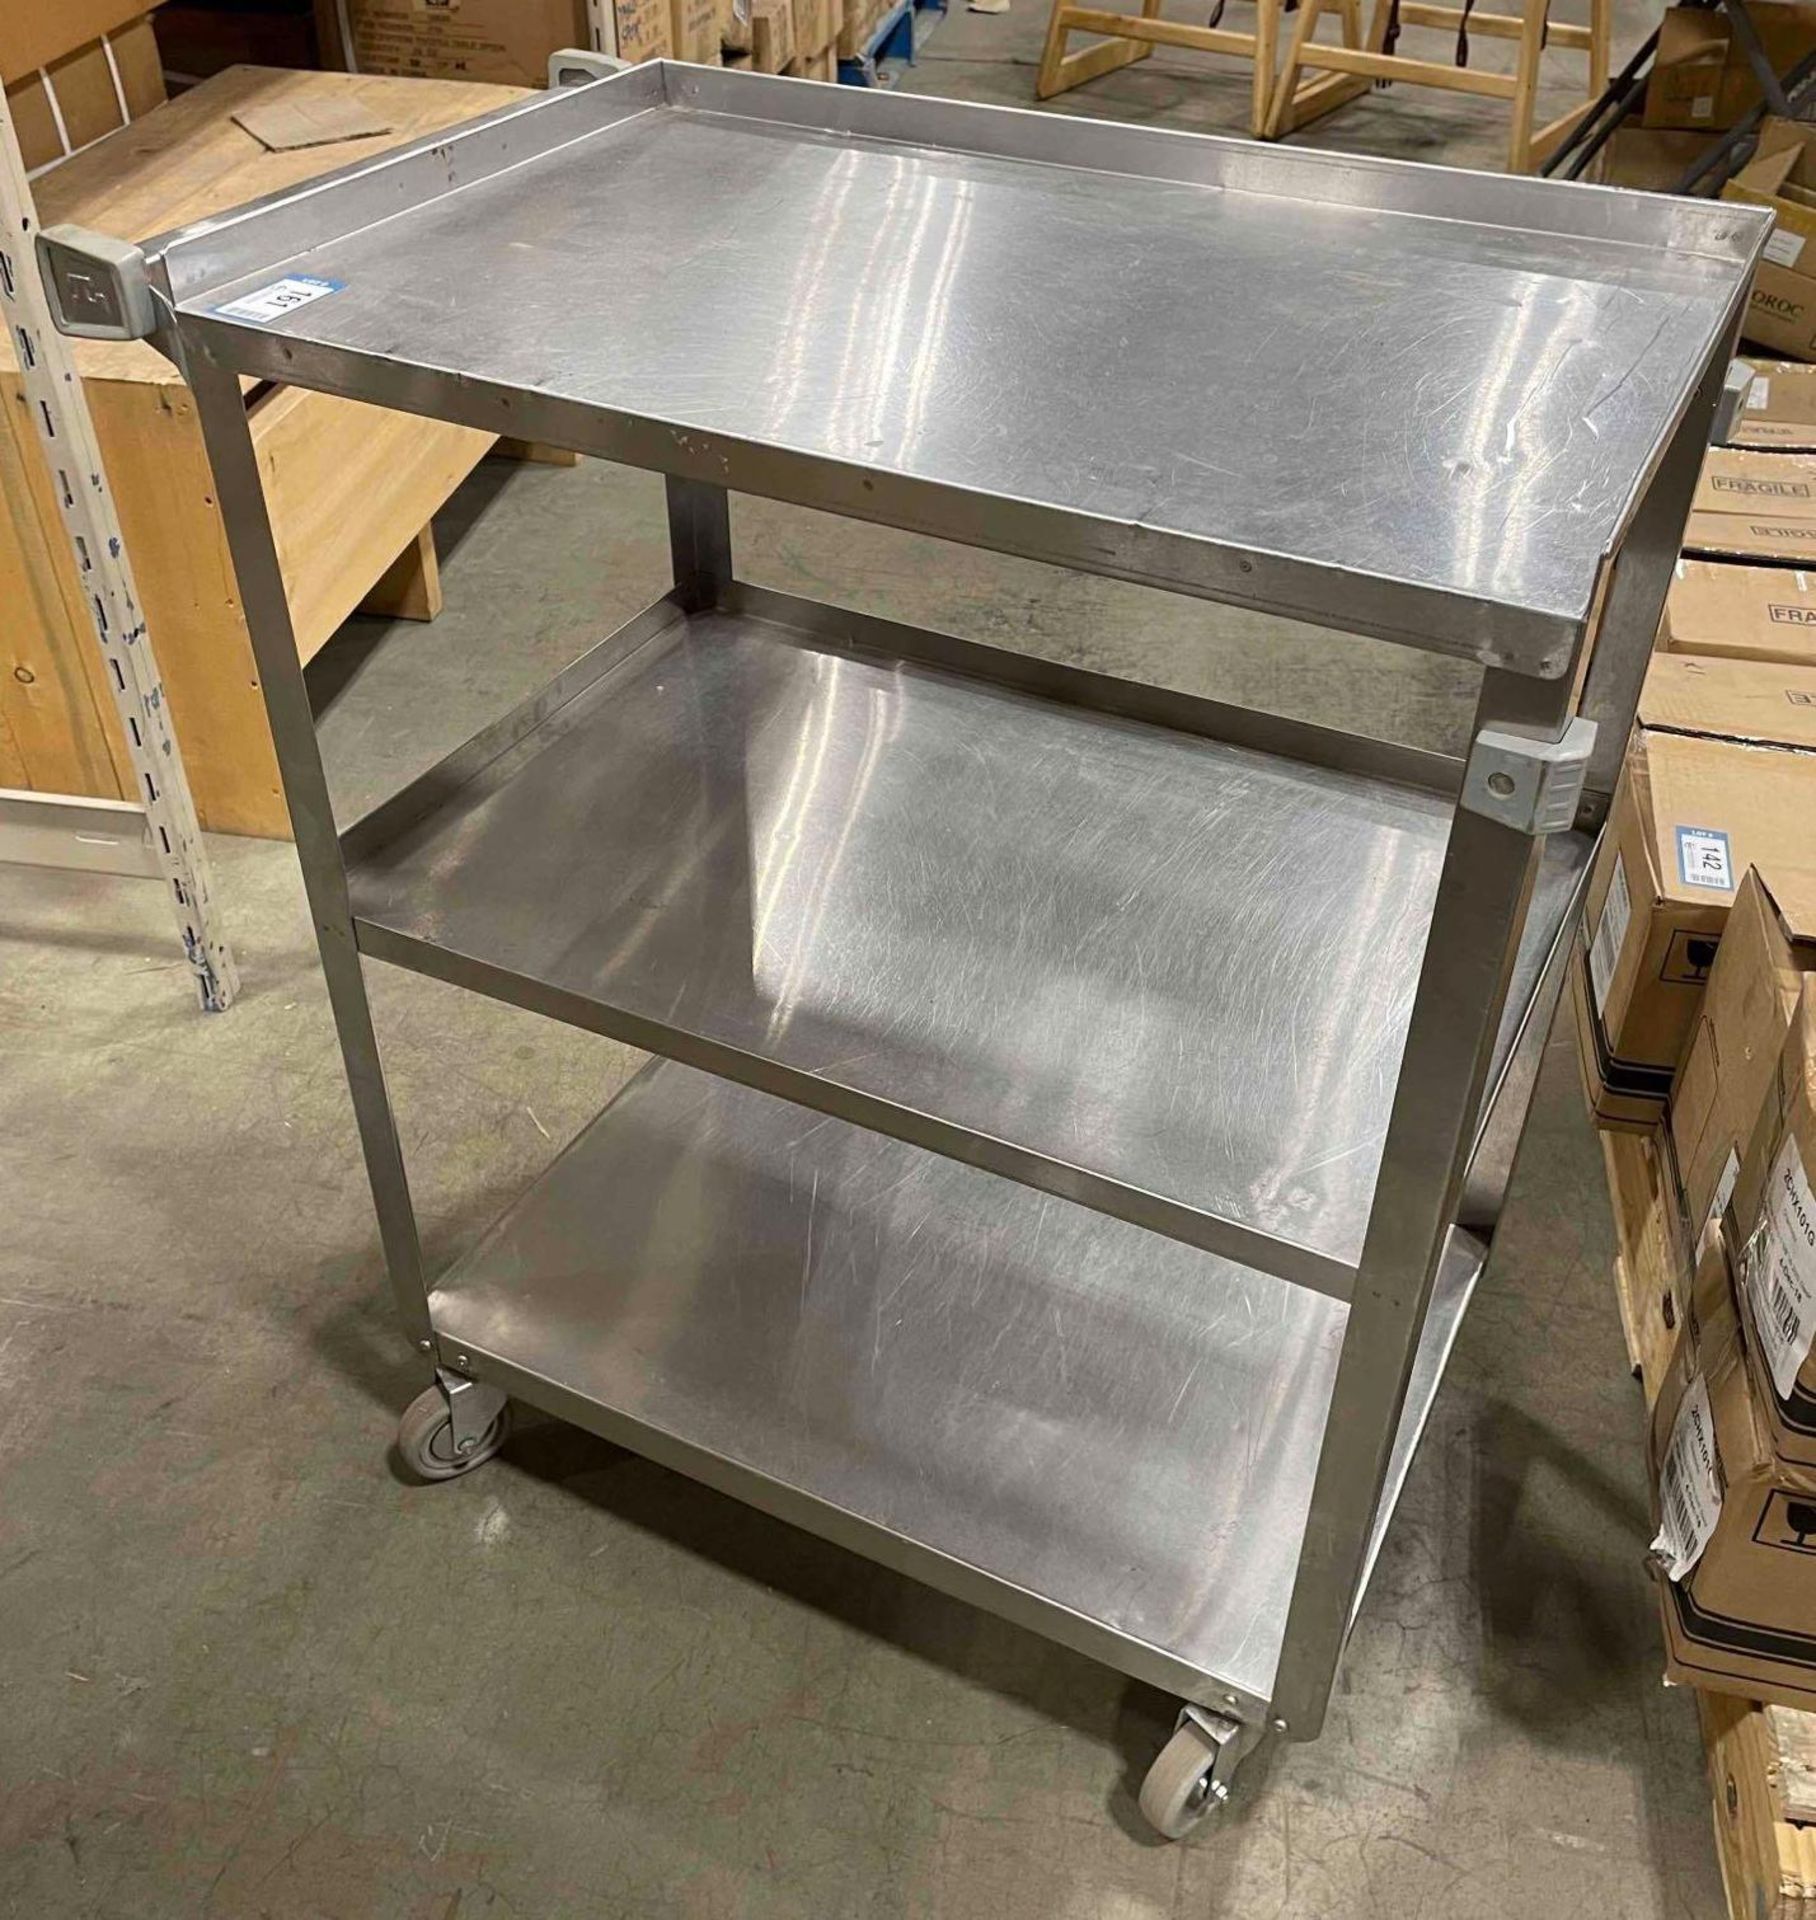 LAKESIDE 311 STAINLESS STEEL UTILITY CART 27" X 16" X 32" 300 LB CAPACITY